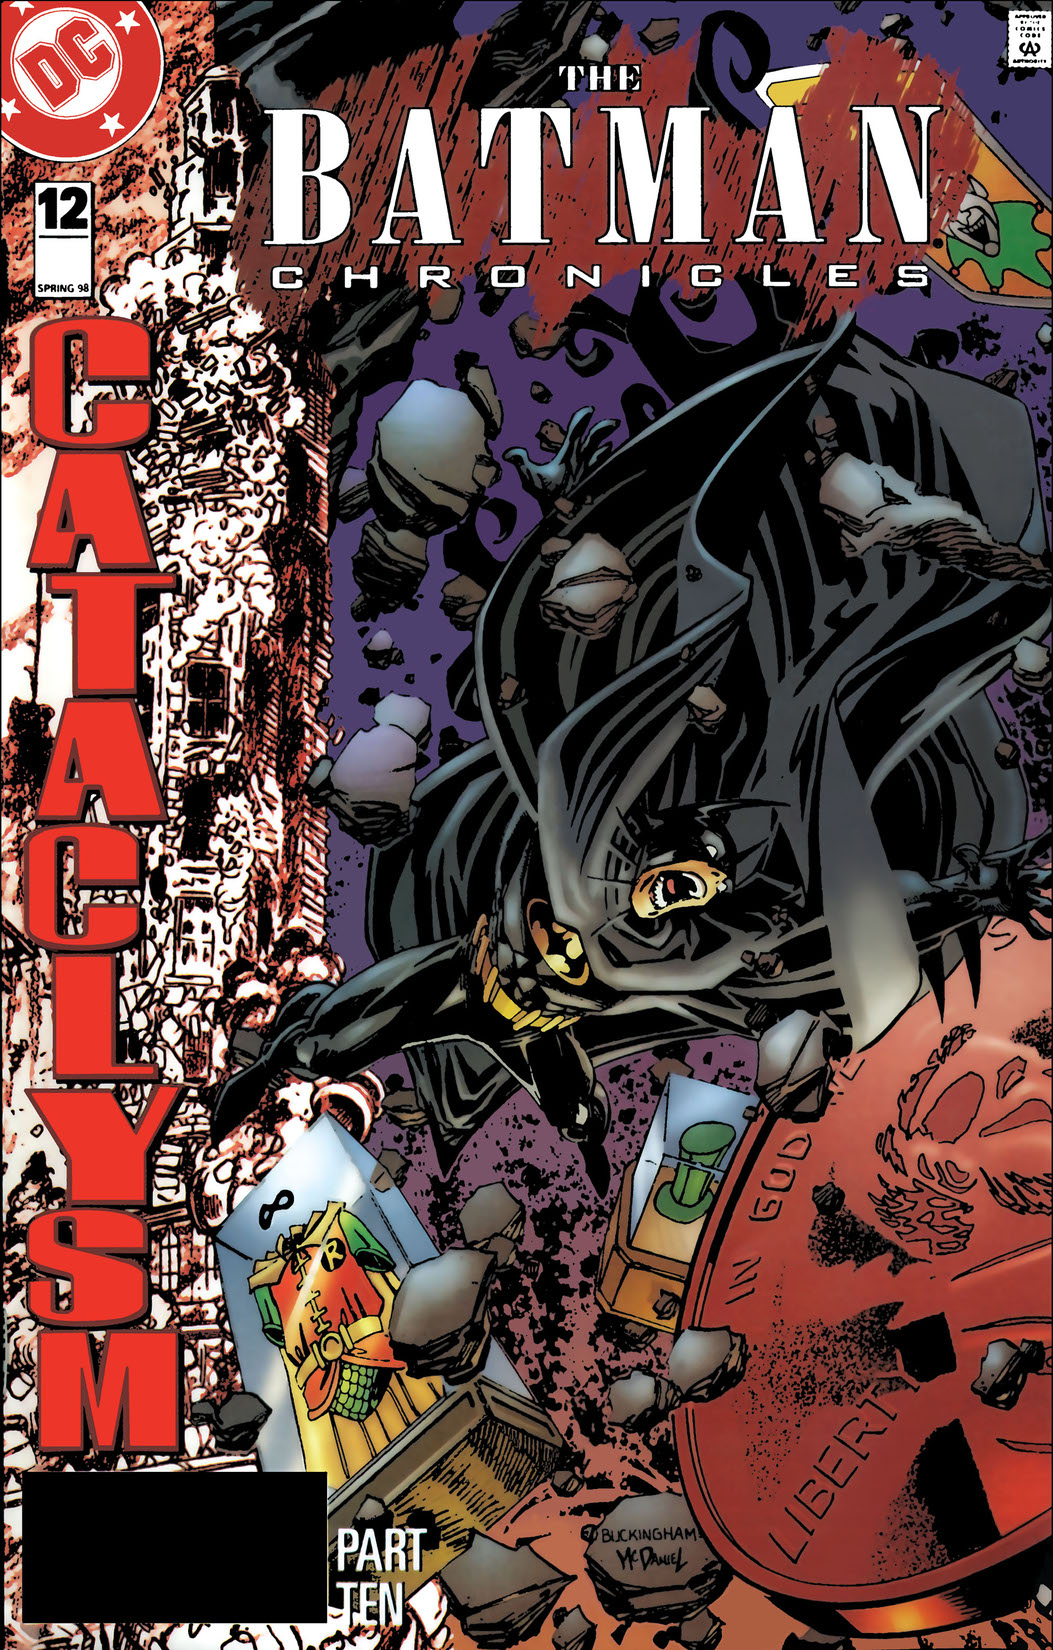 The Batman Chronicles #12 preview images